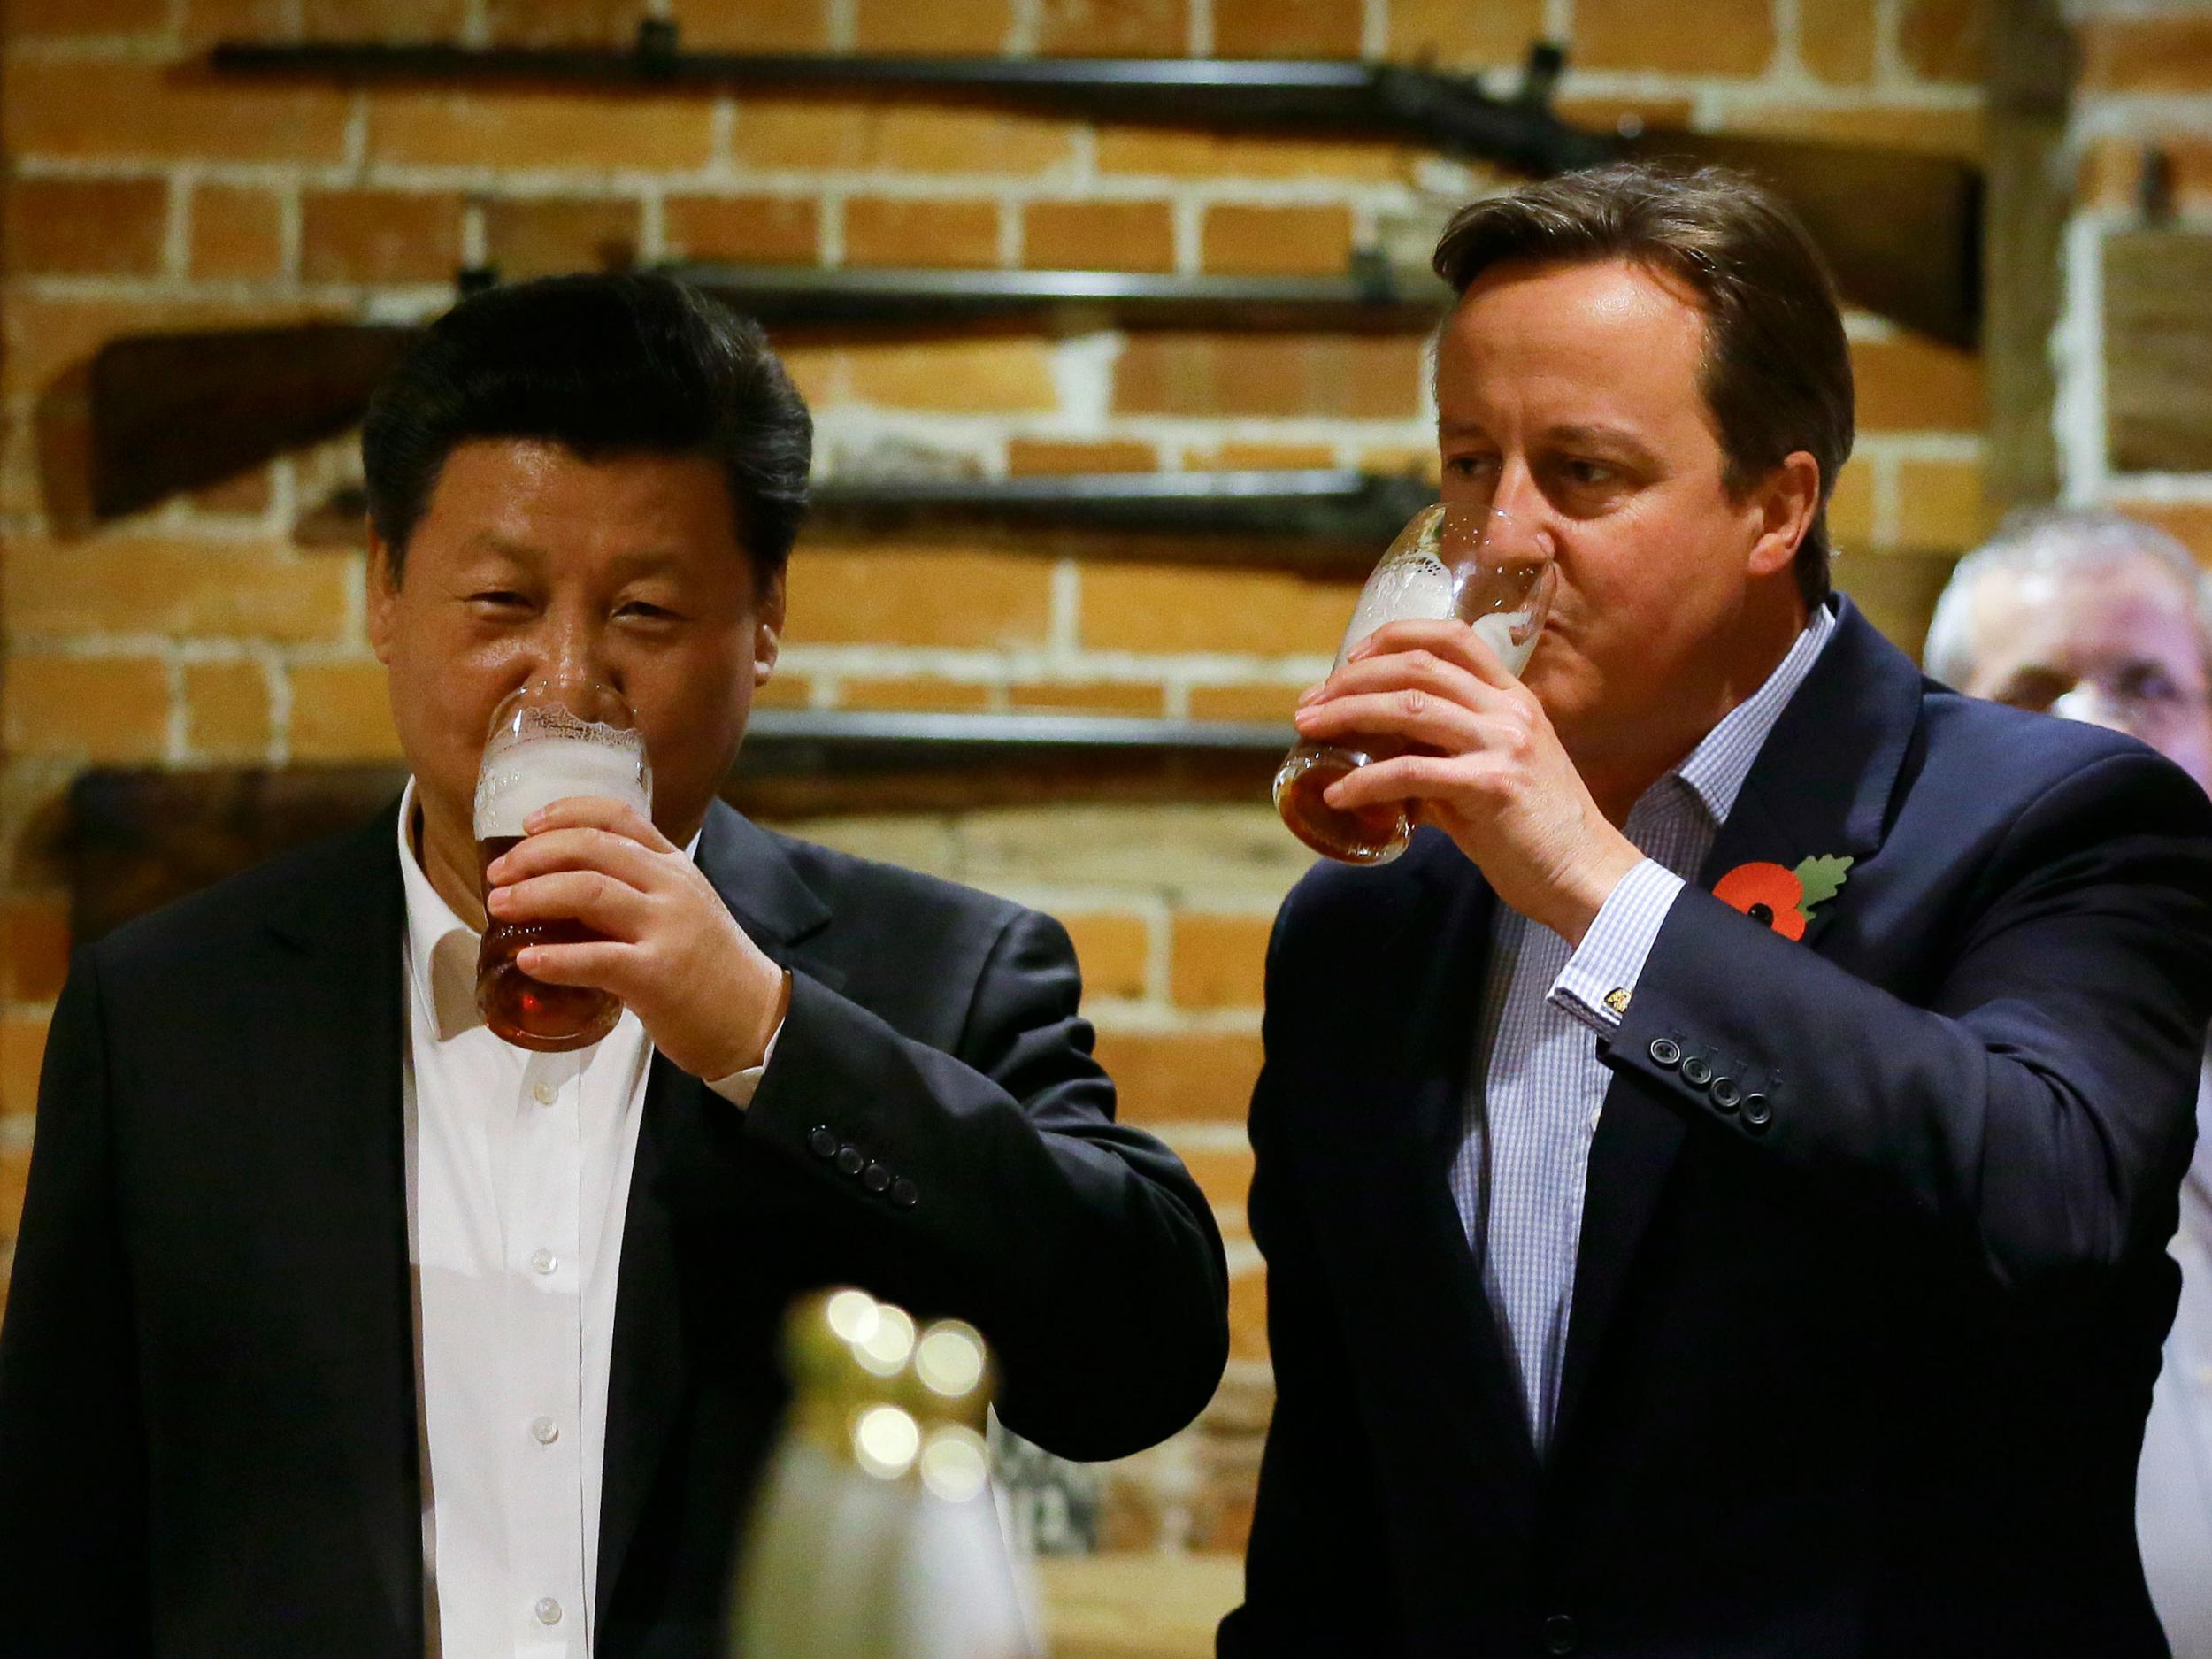 Golden years: in 2015, China’s Xi Jinping had a pint with David Cameron at a pub near Chequers